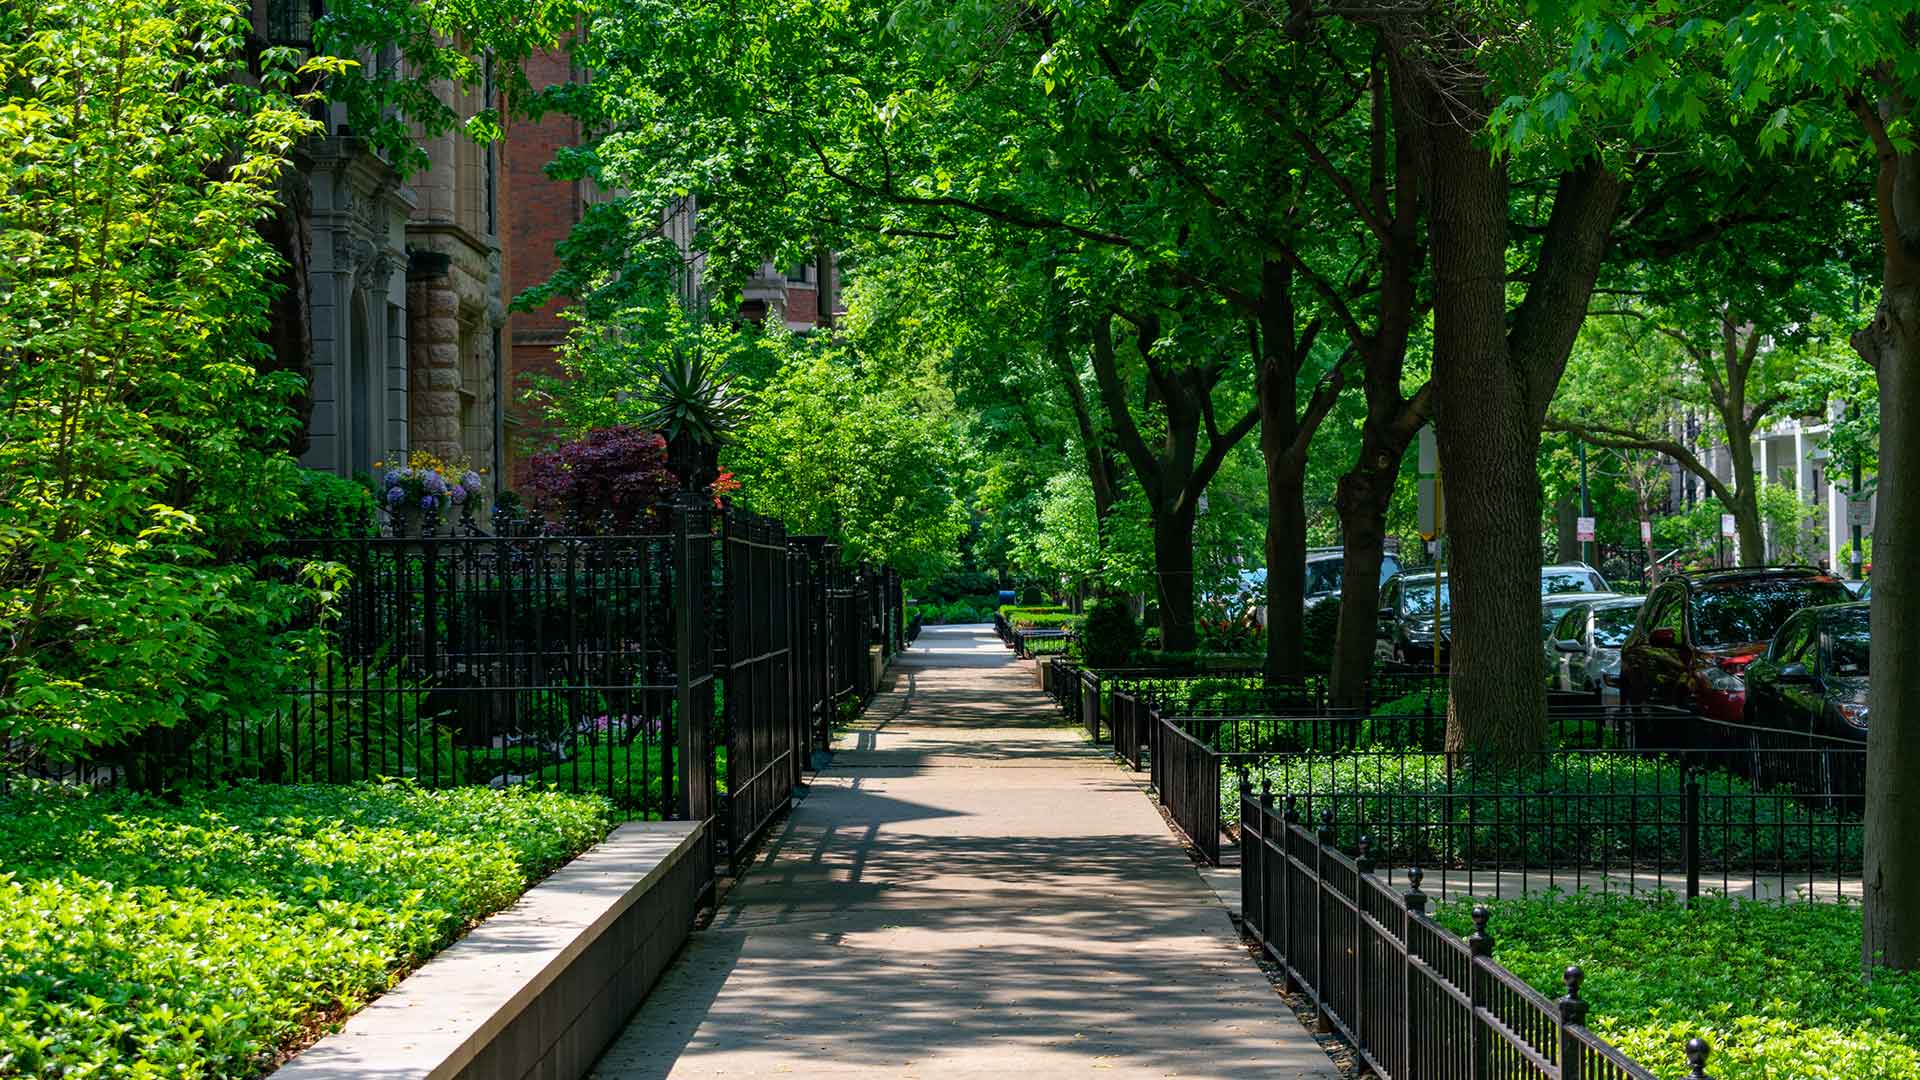 A sidewalk surrounded by green plants and trees in a residential area of the Gold Coast neighborhood of Chicago